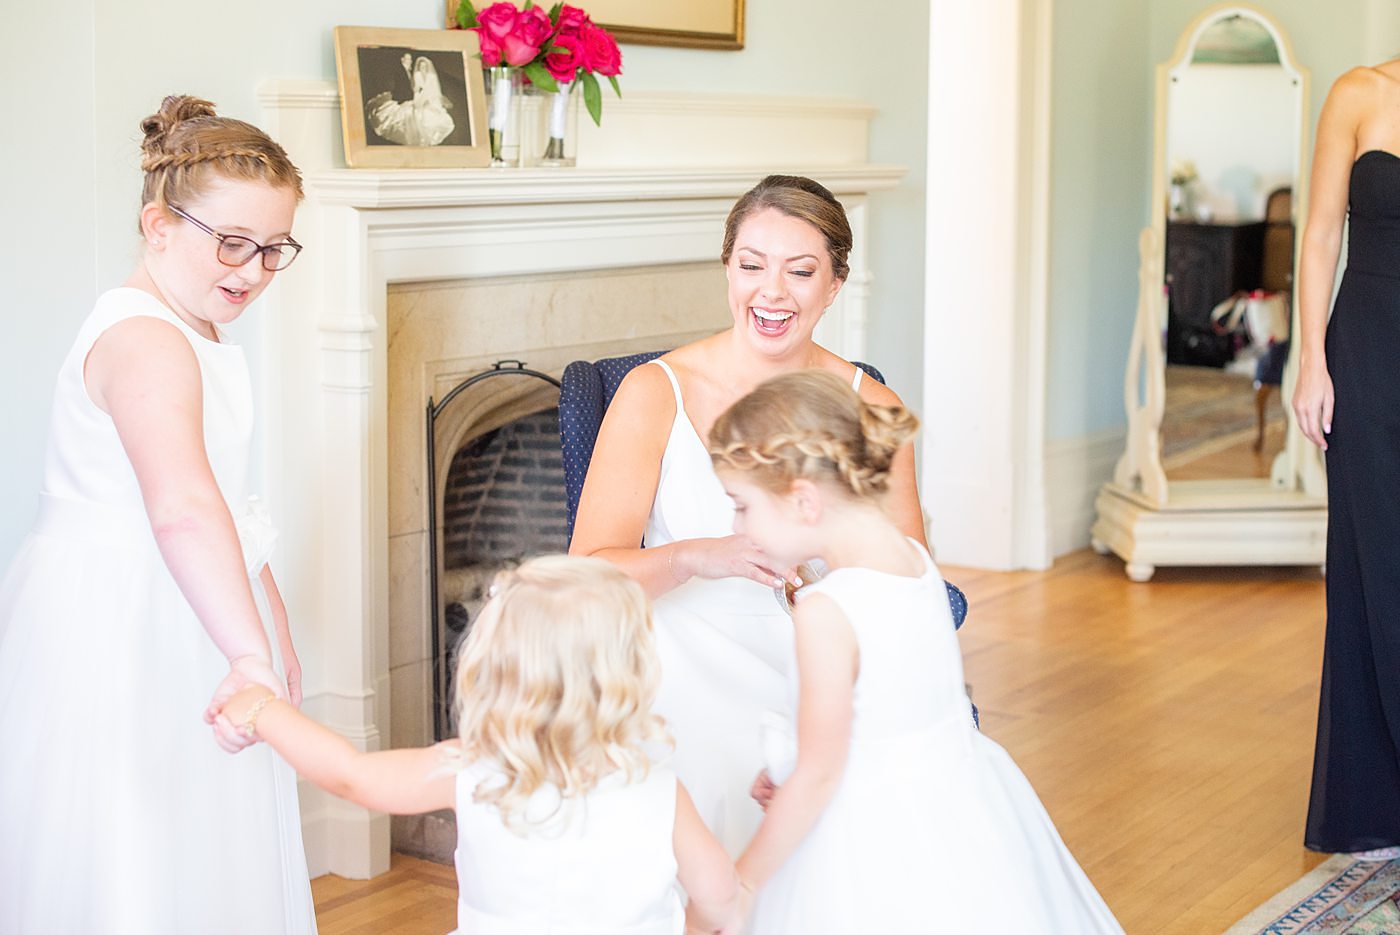 Photos by Mikkel Paige Photography at Waveny House wedding venue in New Canaan, Connecticut. This beautiful venue has an outdoor garden for the ceremony and indoor historic home for the reception. The bride got ready in the main house with her flower girls. #mikkelpaige #wavenyhouse #wavenyhousewedding #connecticutweddingvenue #connecticutweddingphotographer #gettingready #flowergirls